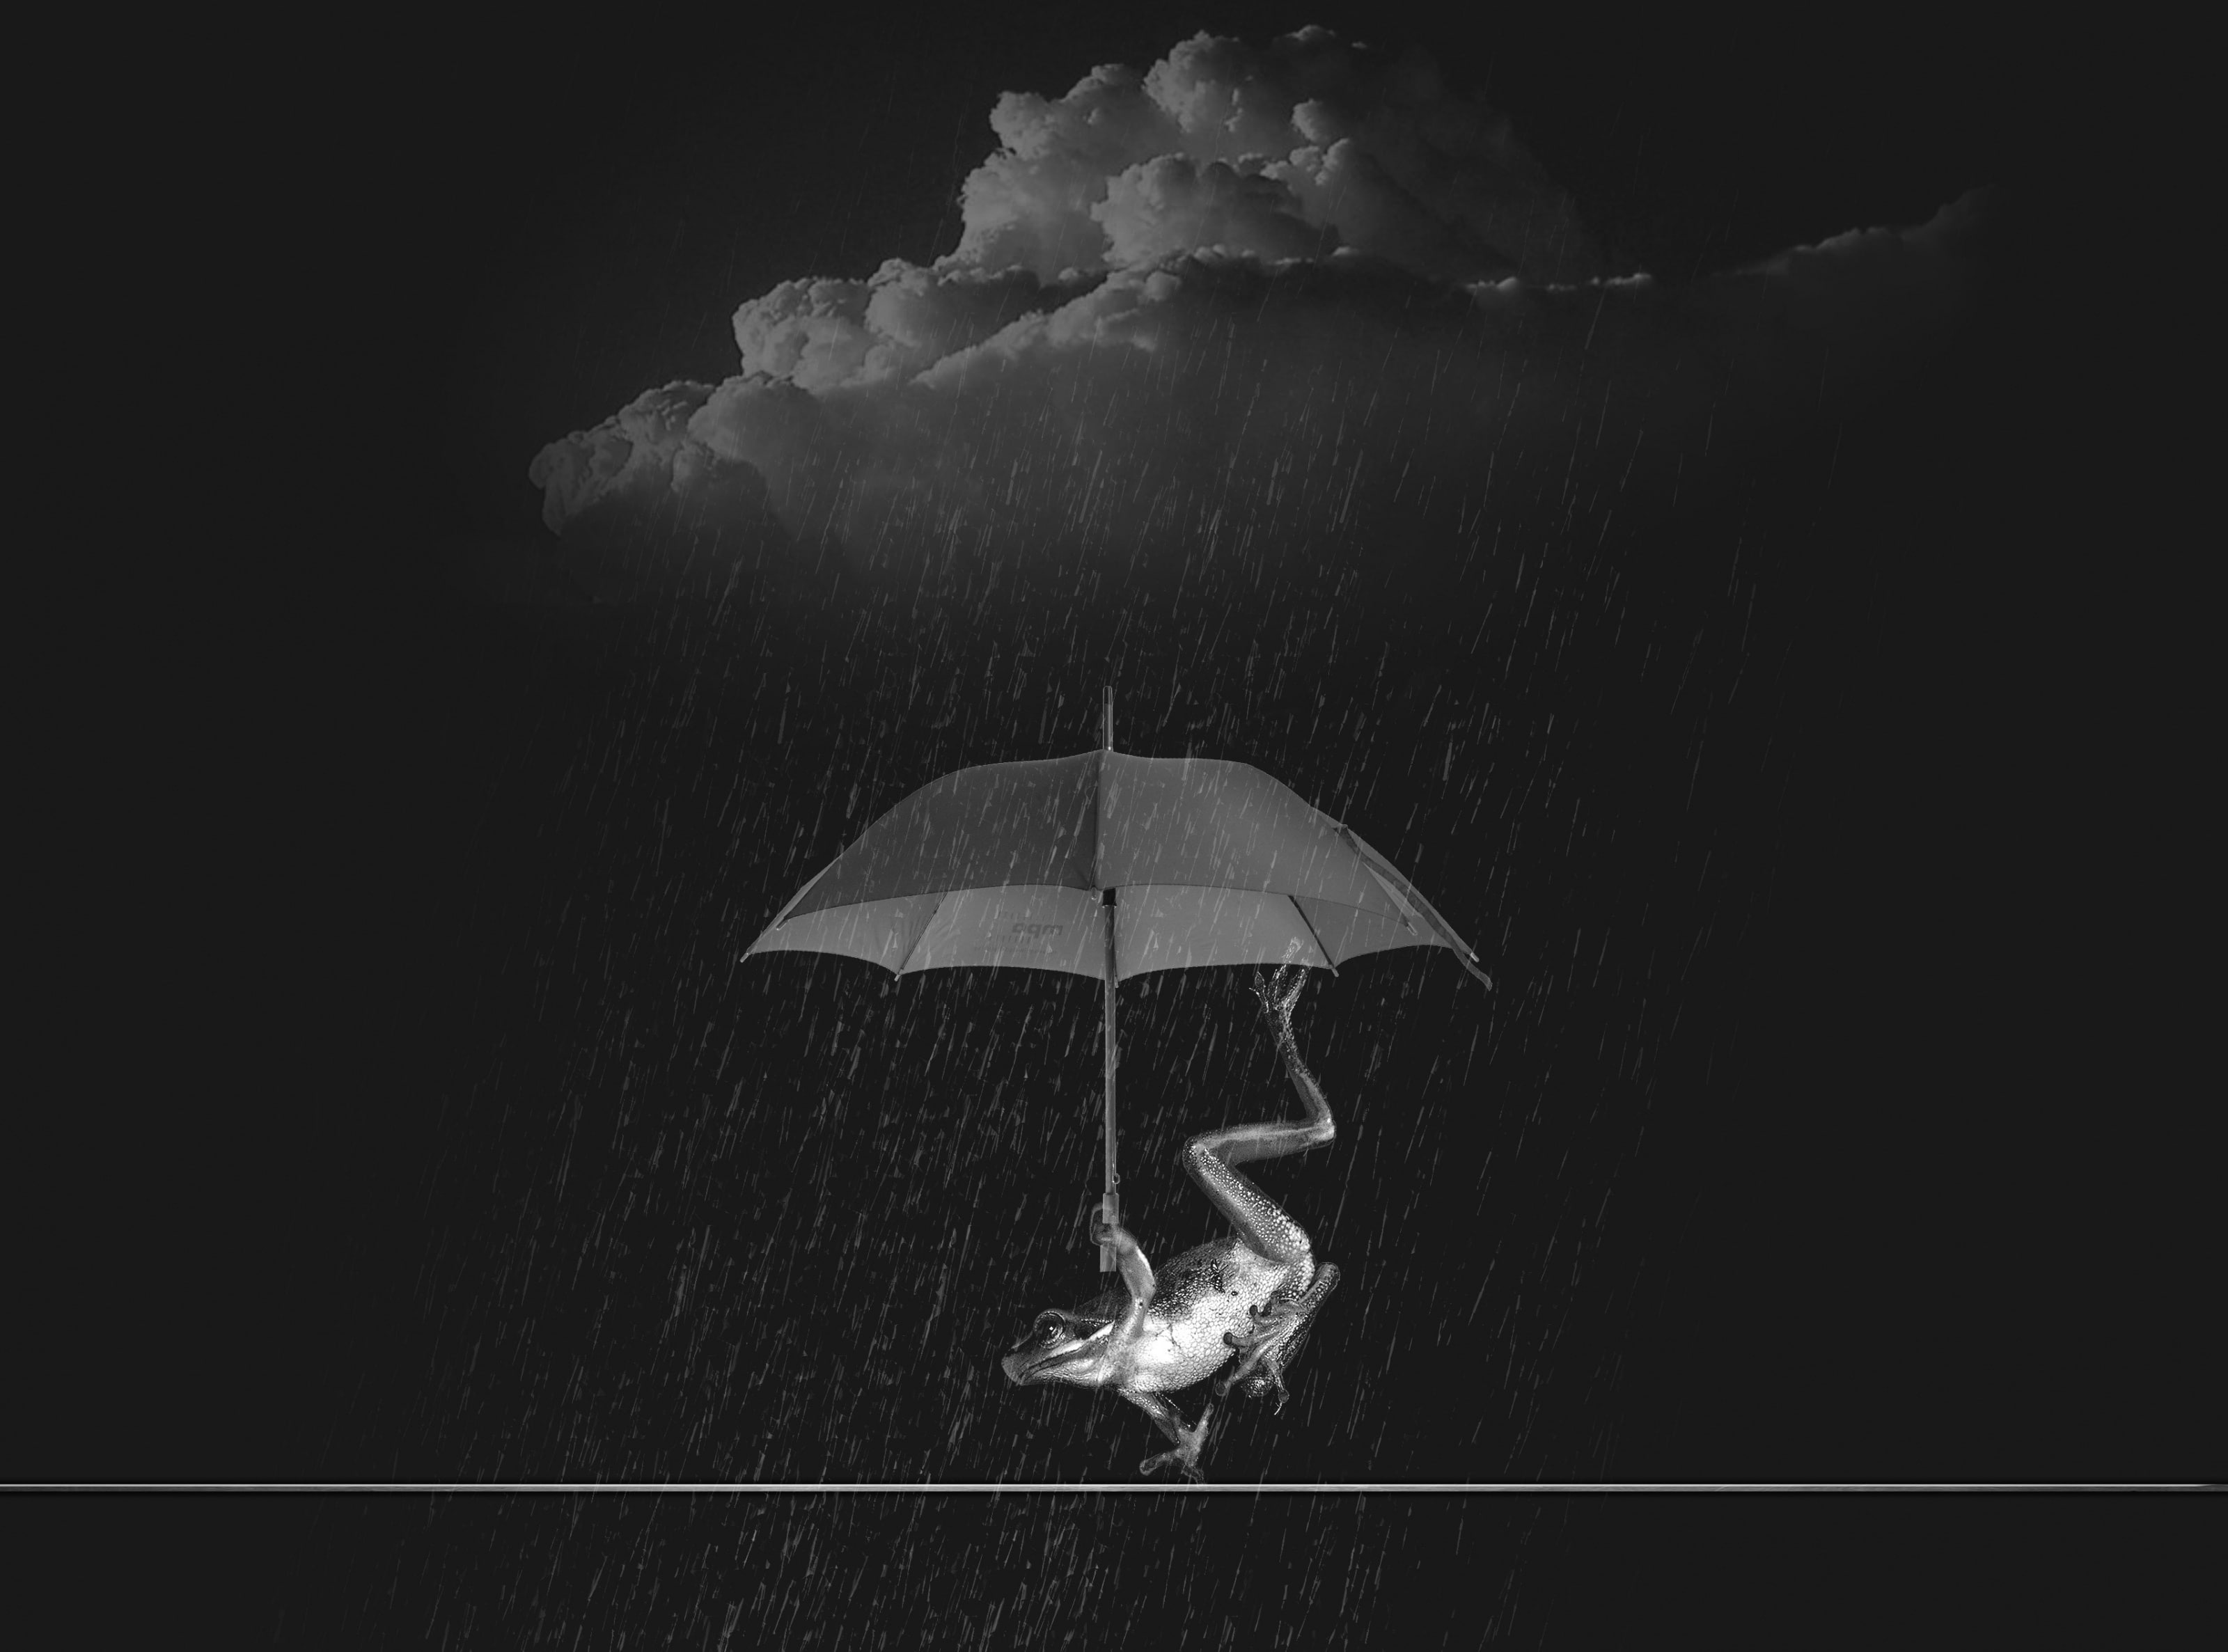 Weatherman, frog with umbrella wallpaper, Black and White, Water